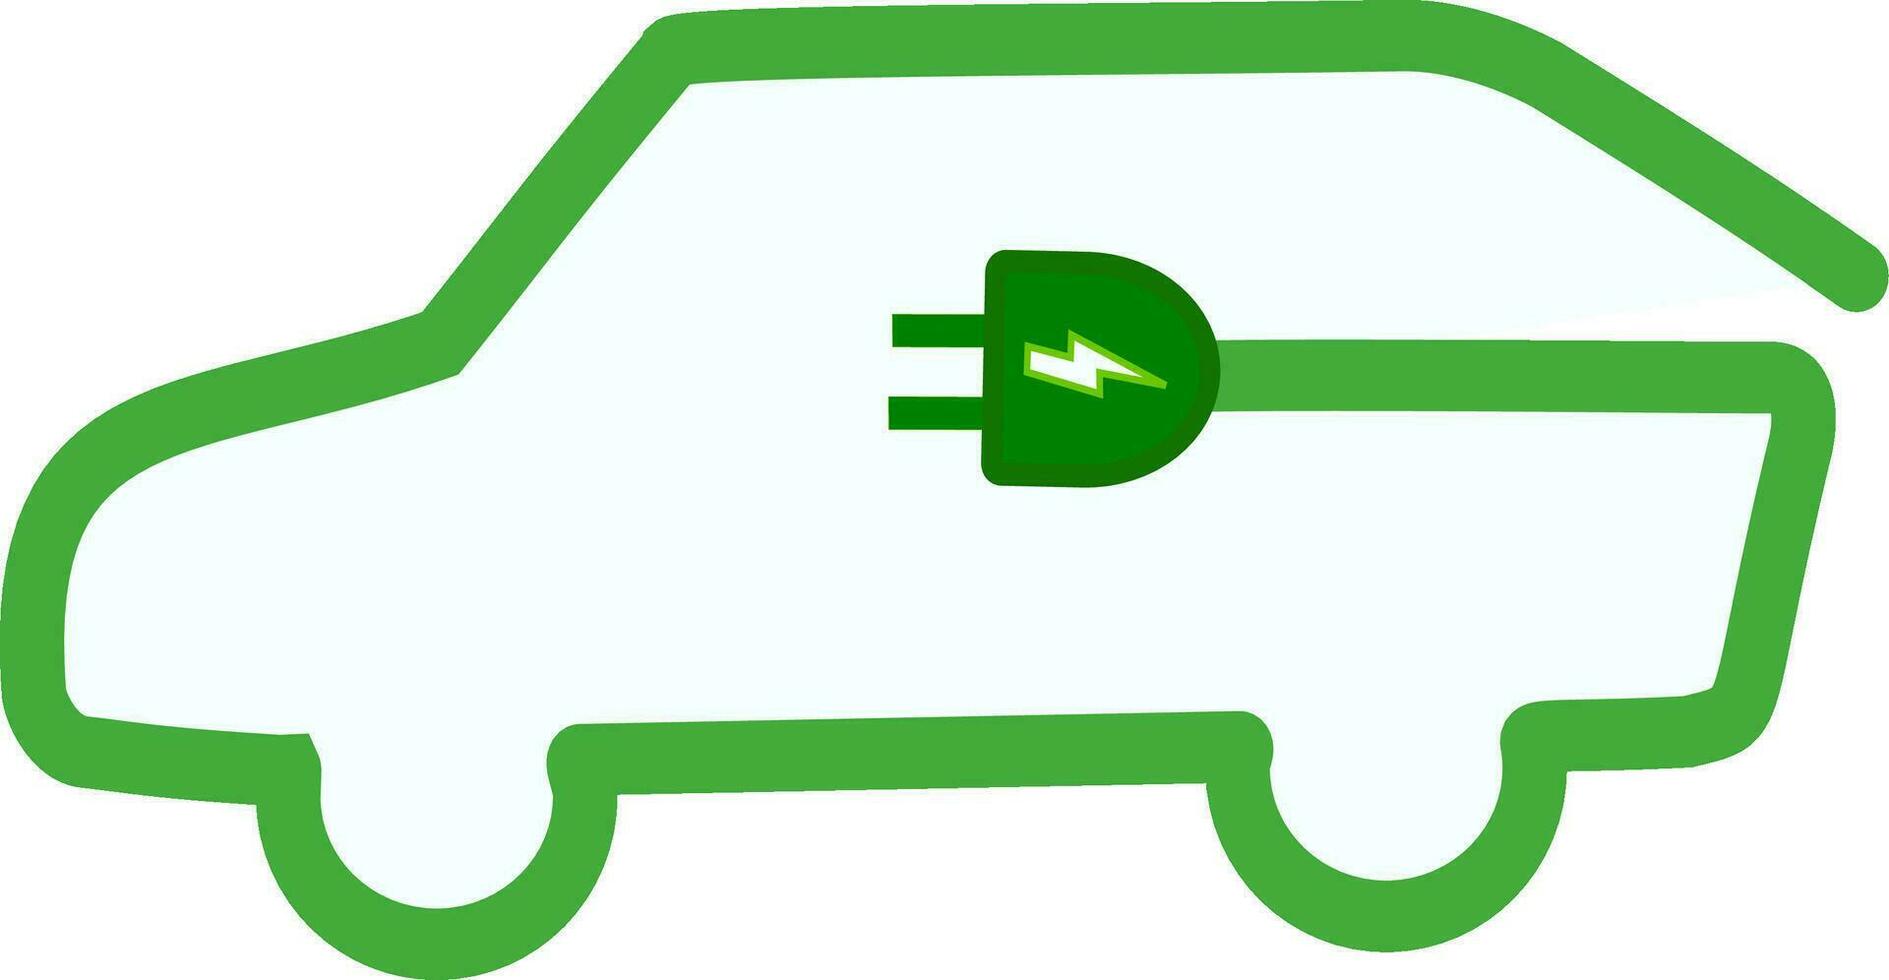 Electric car with plug icon symbol. EV car, green hybrid vehicle charging point logotype. Eco-friendly vehicle concept. Replaceable  vector design.